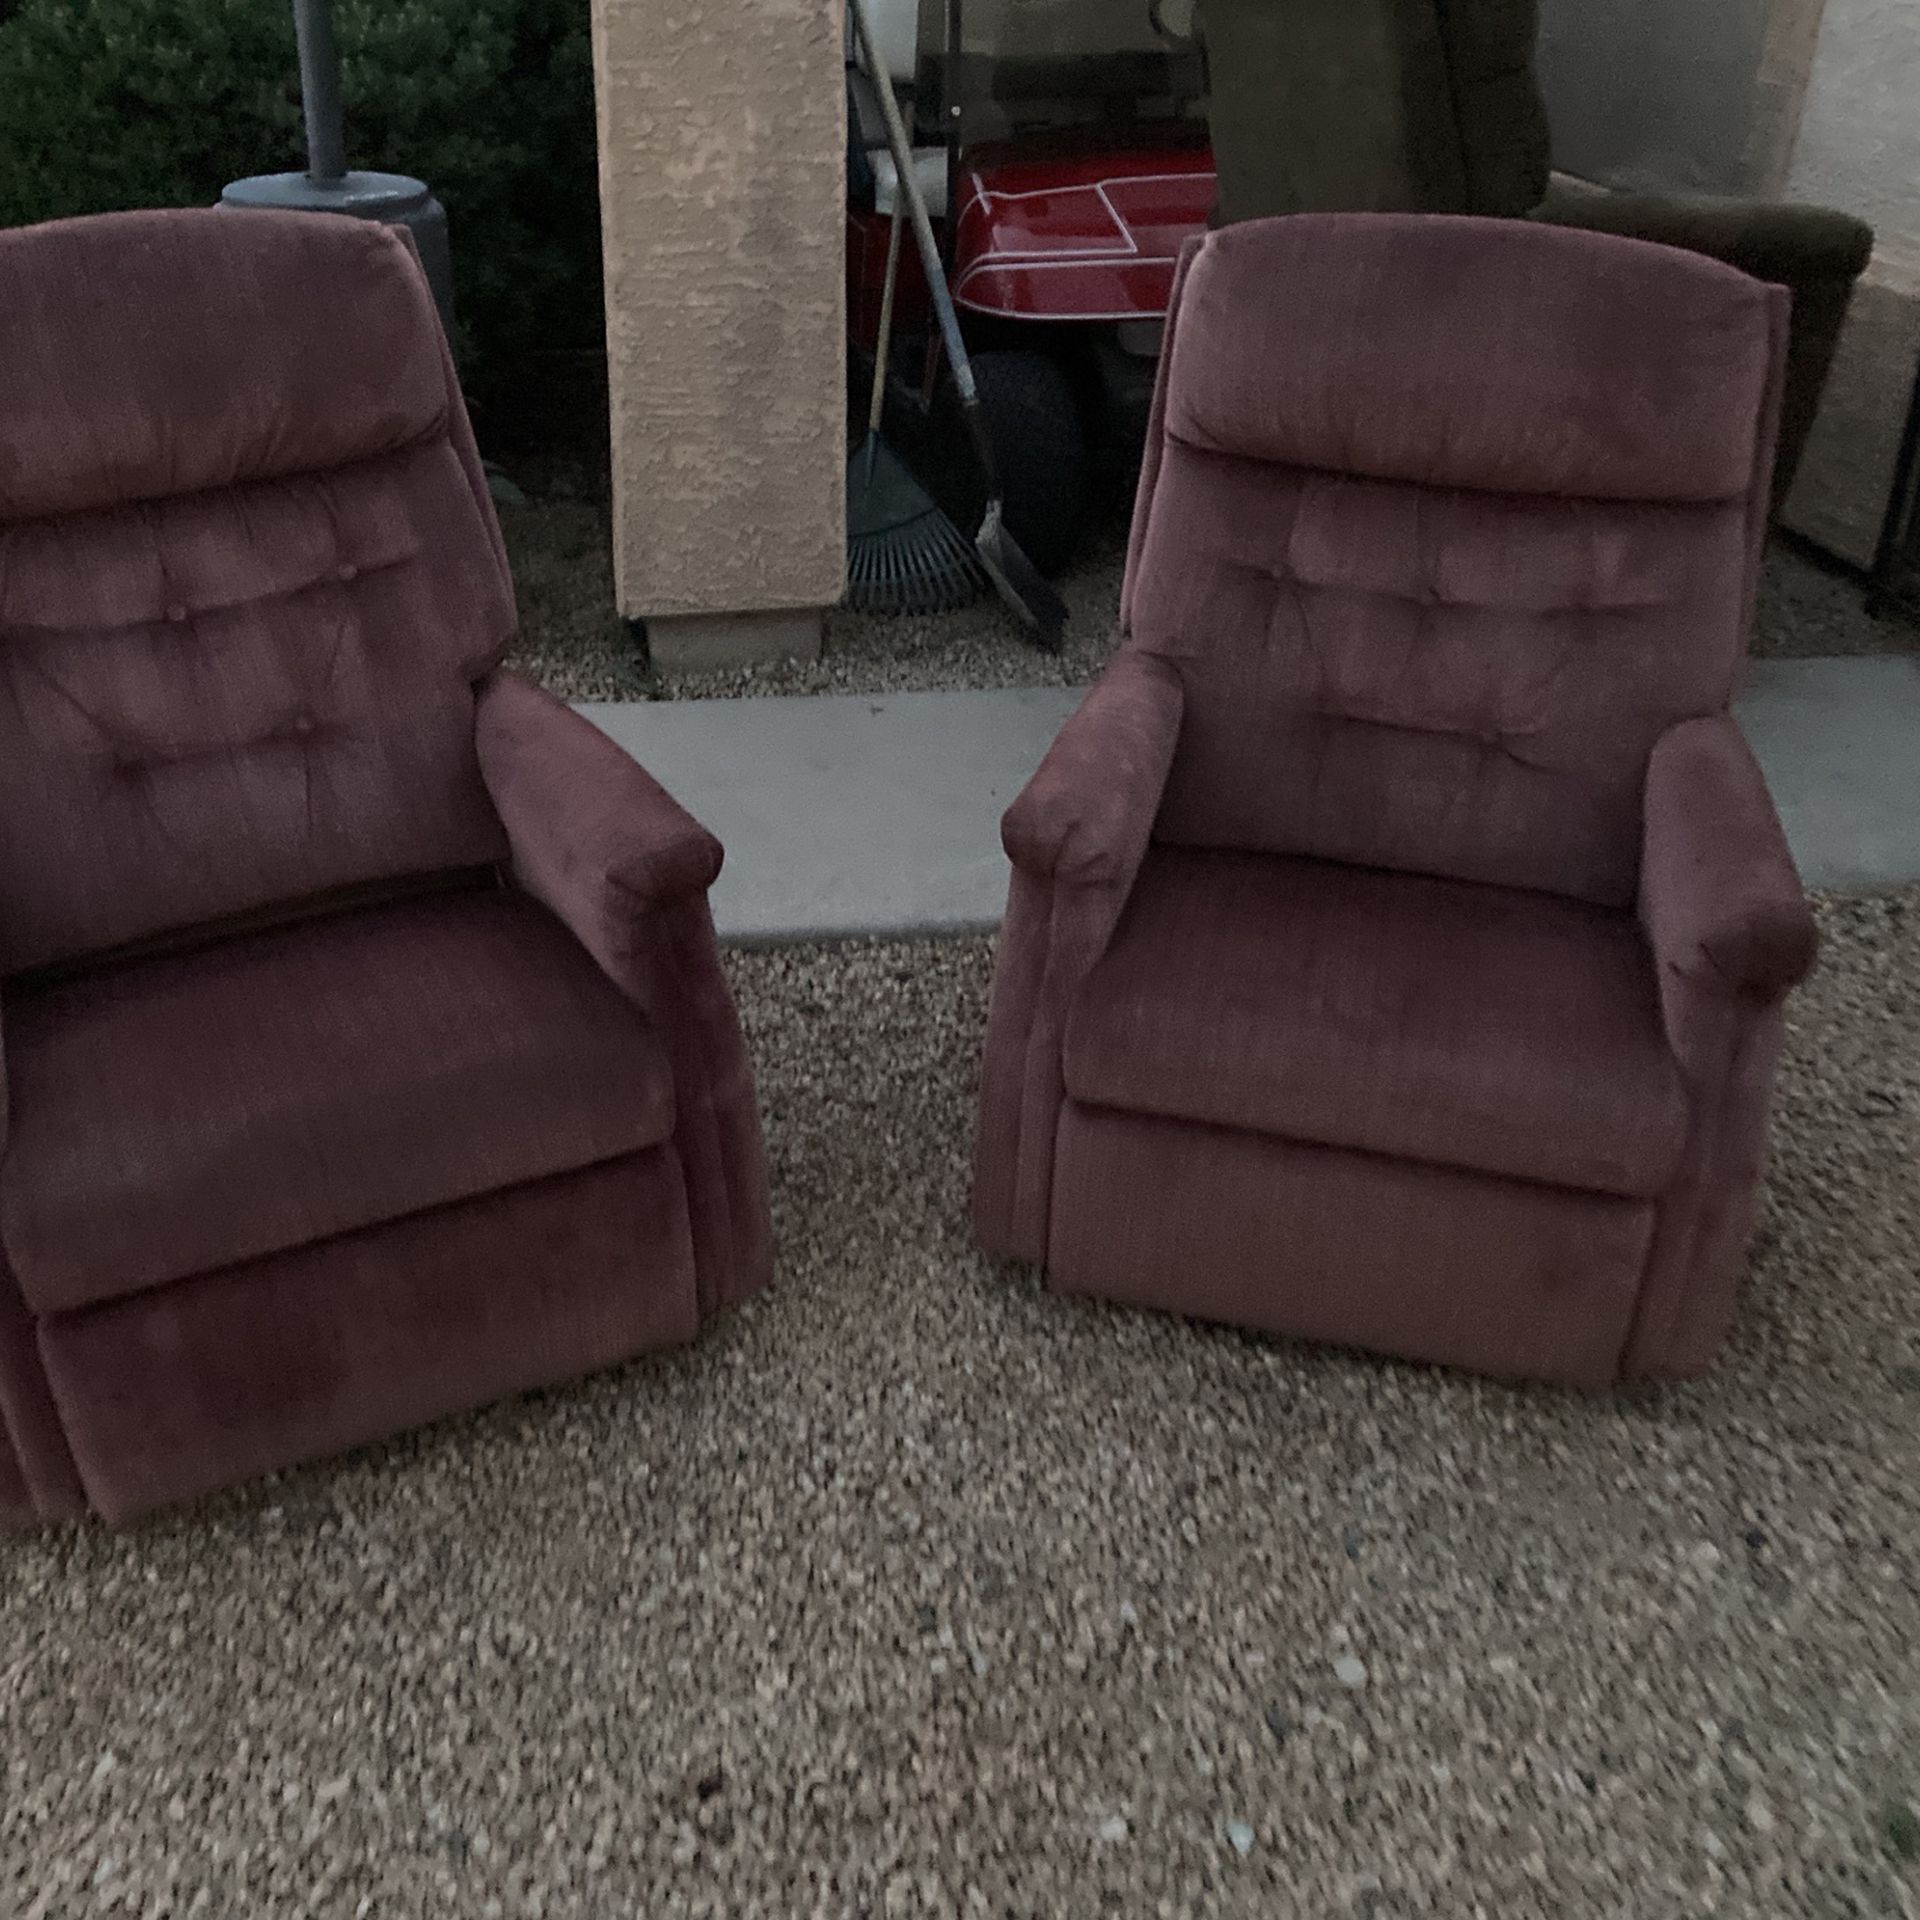 Matching Recliners Like New